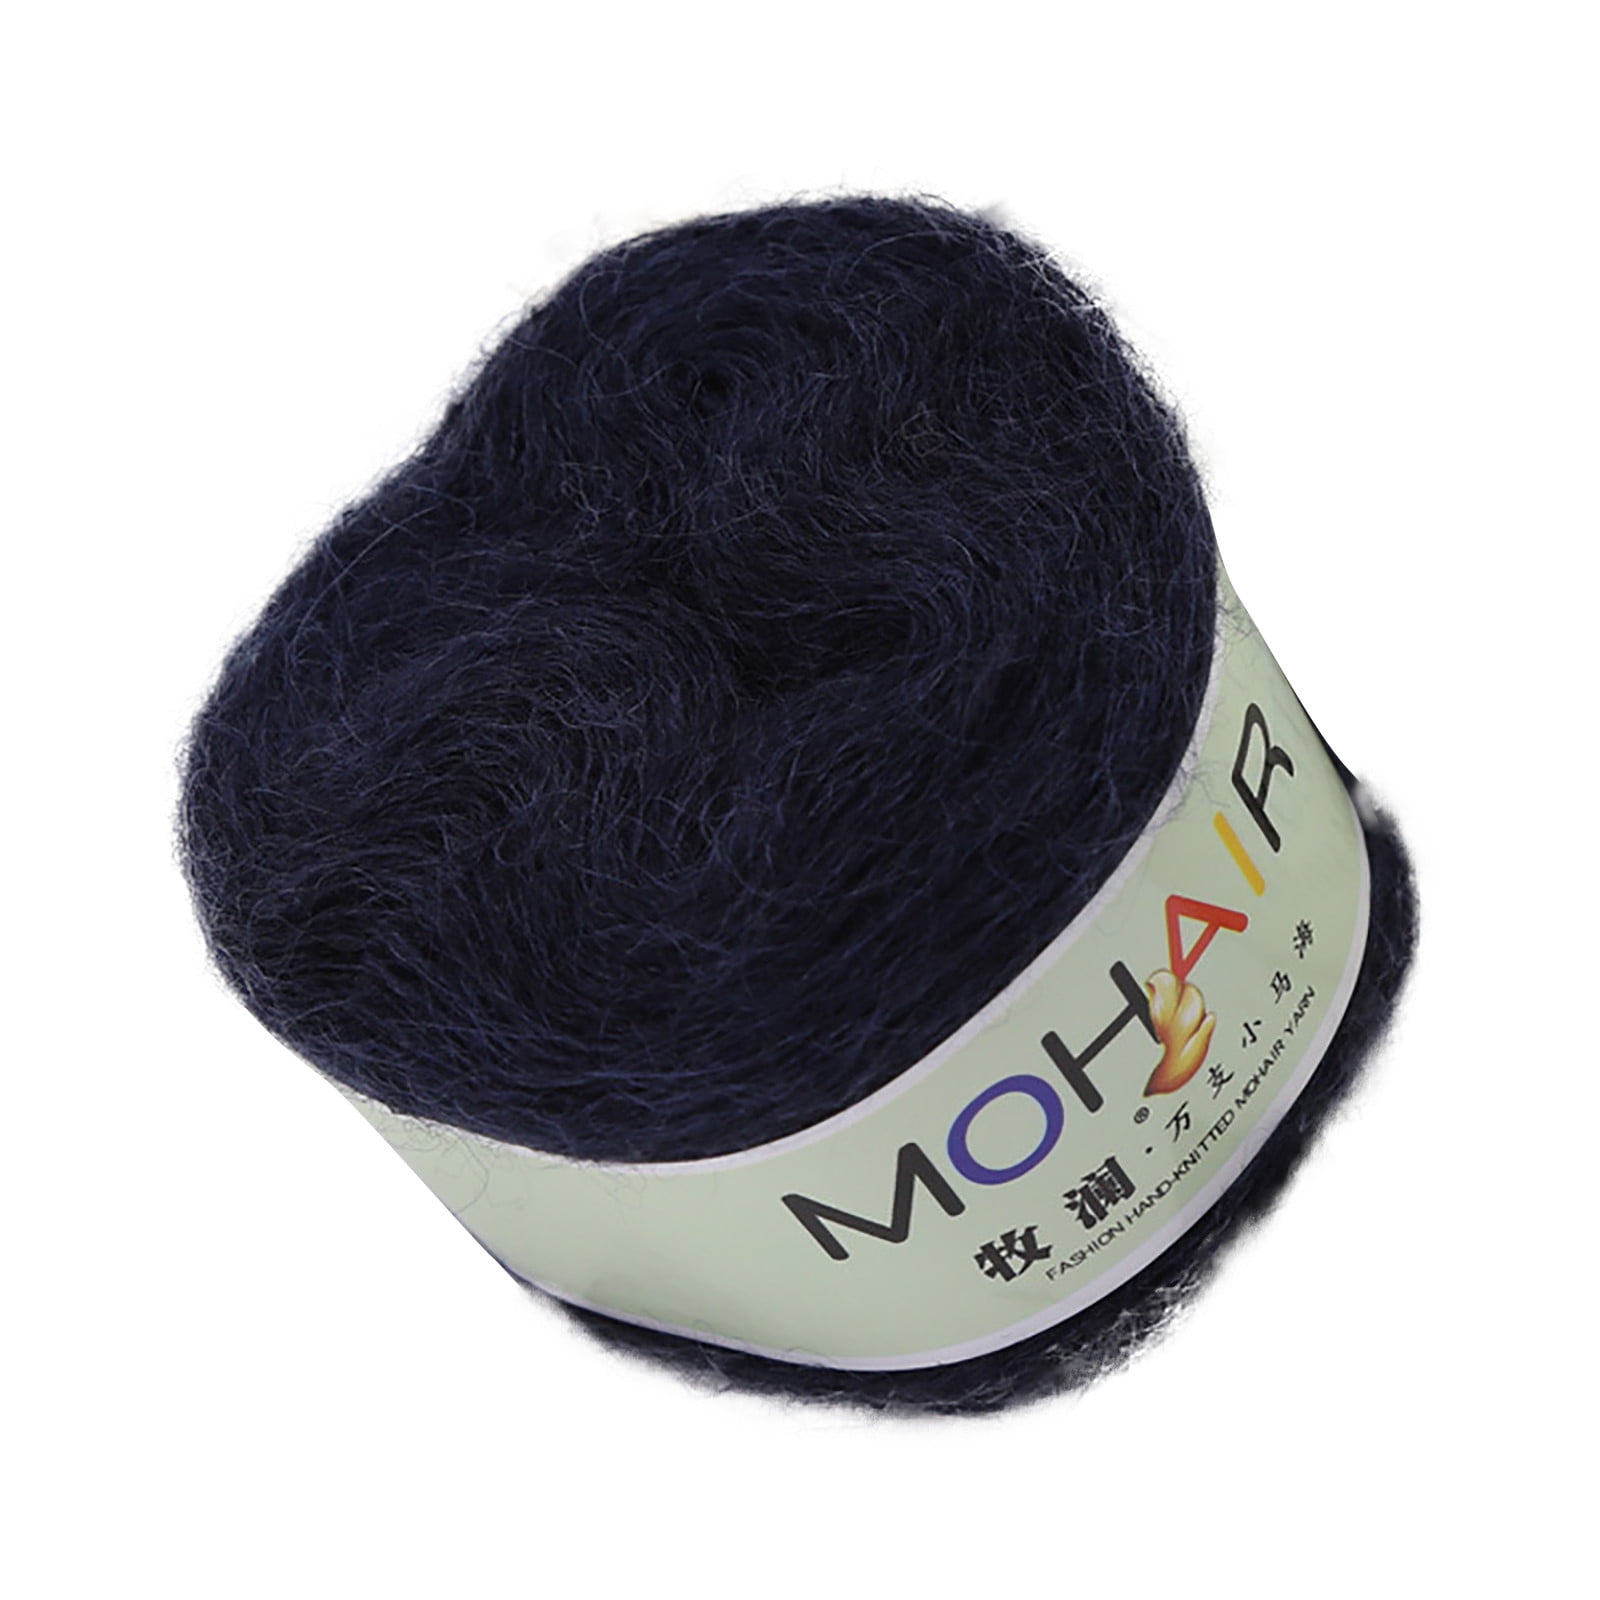 Colorful Comfortable Stylish Angola Mohair Cashmere Wool Yarn Skeins Winter GIFT 